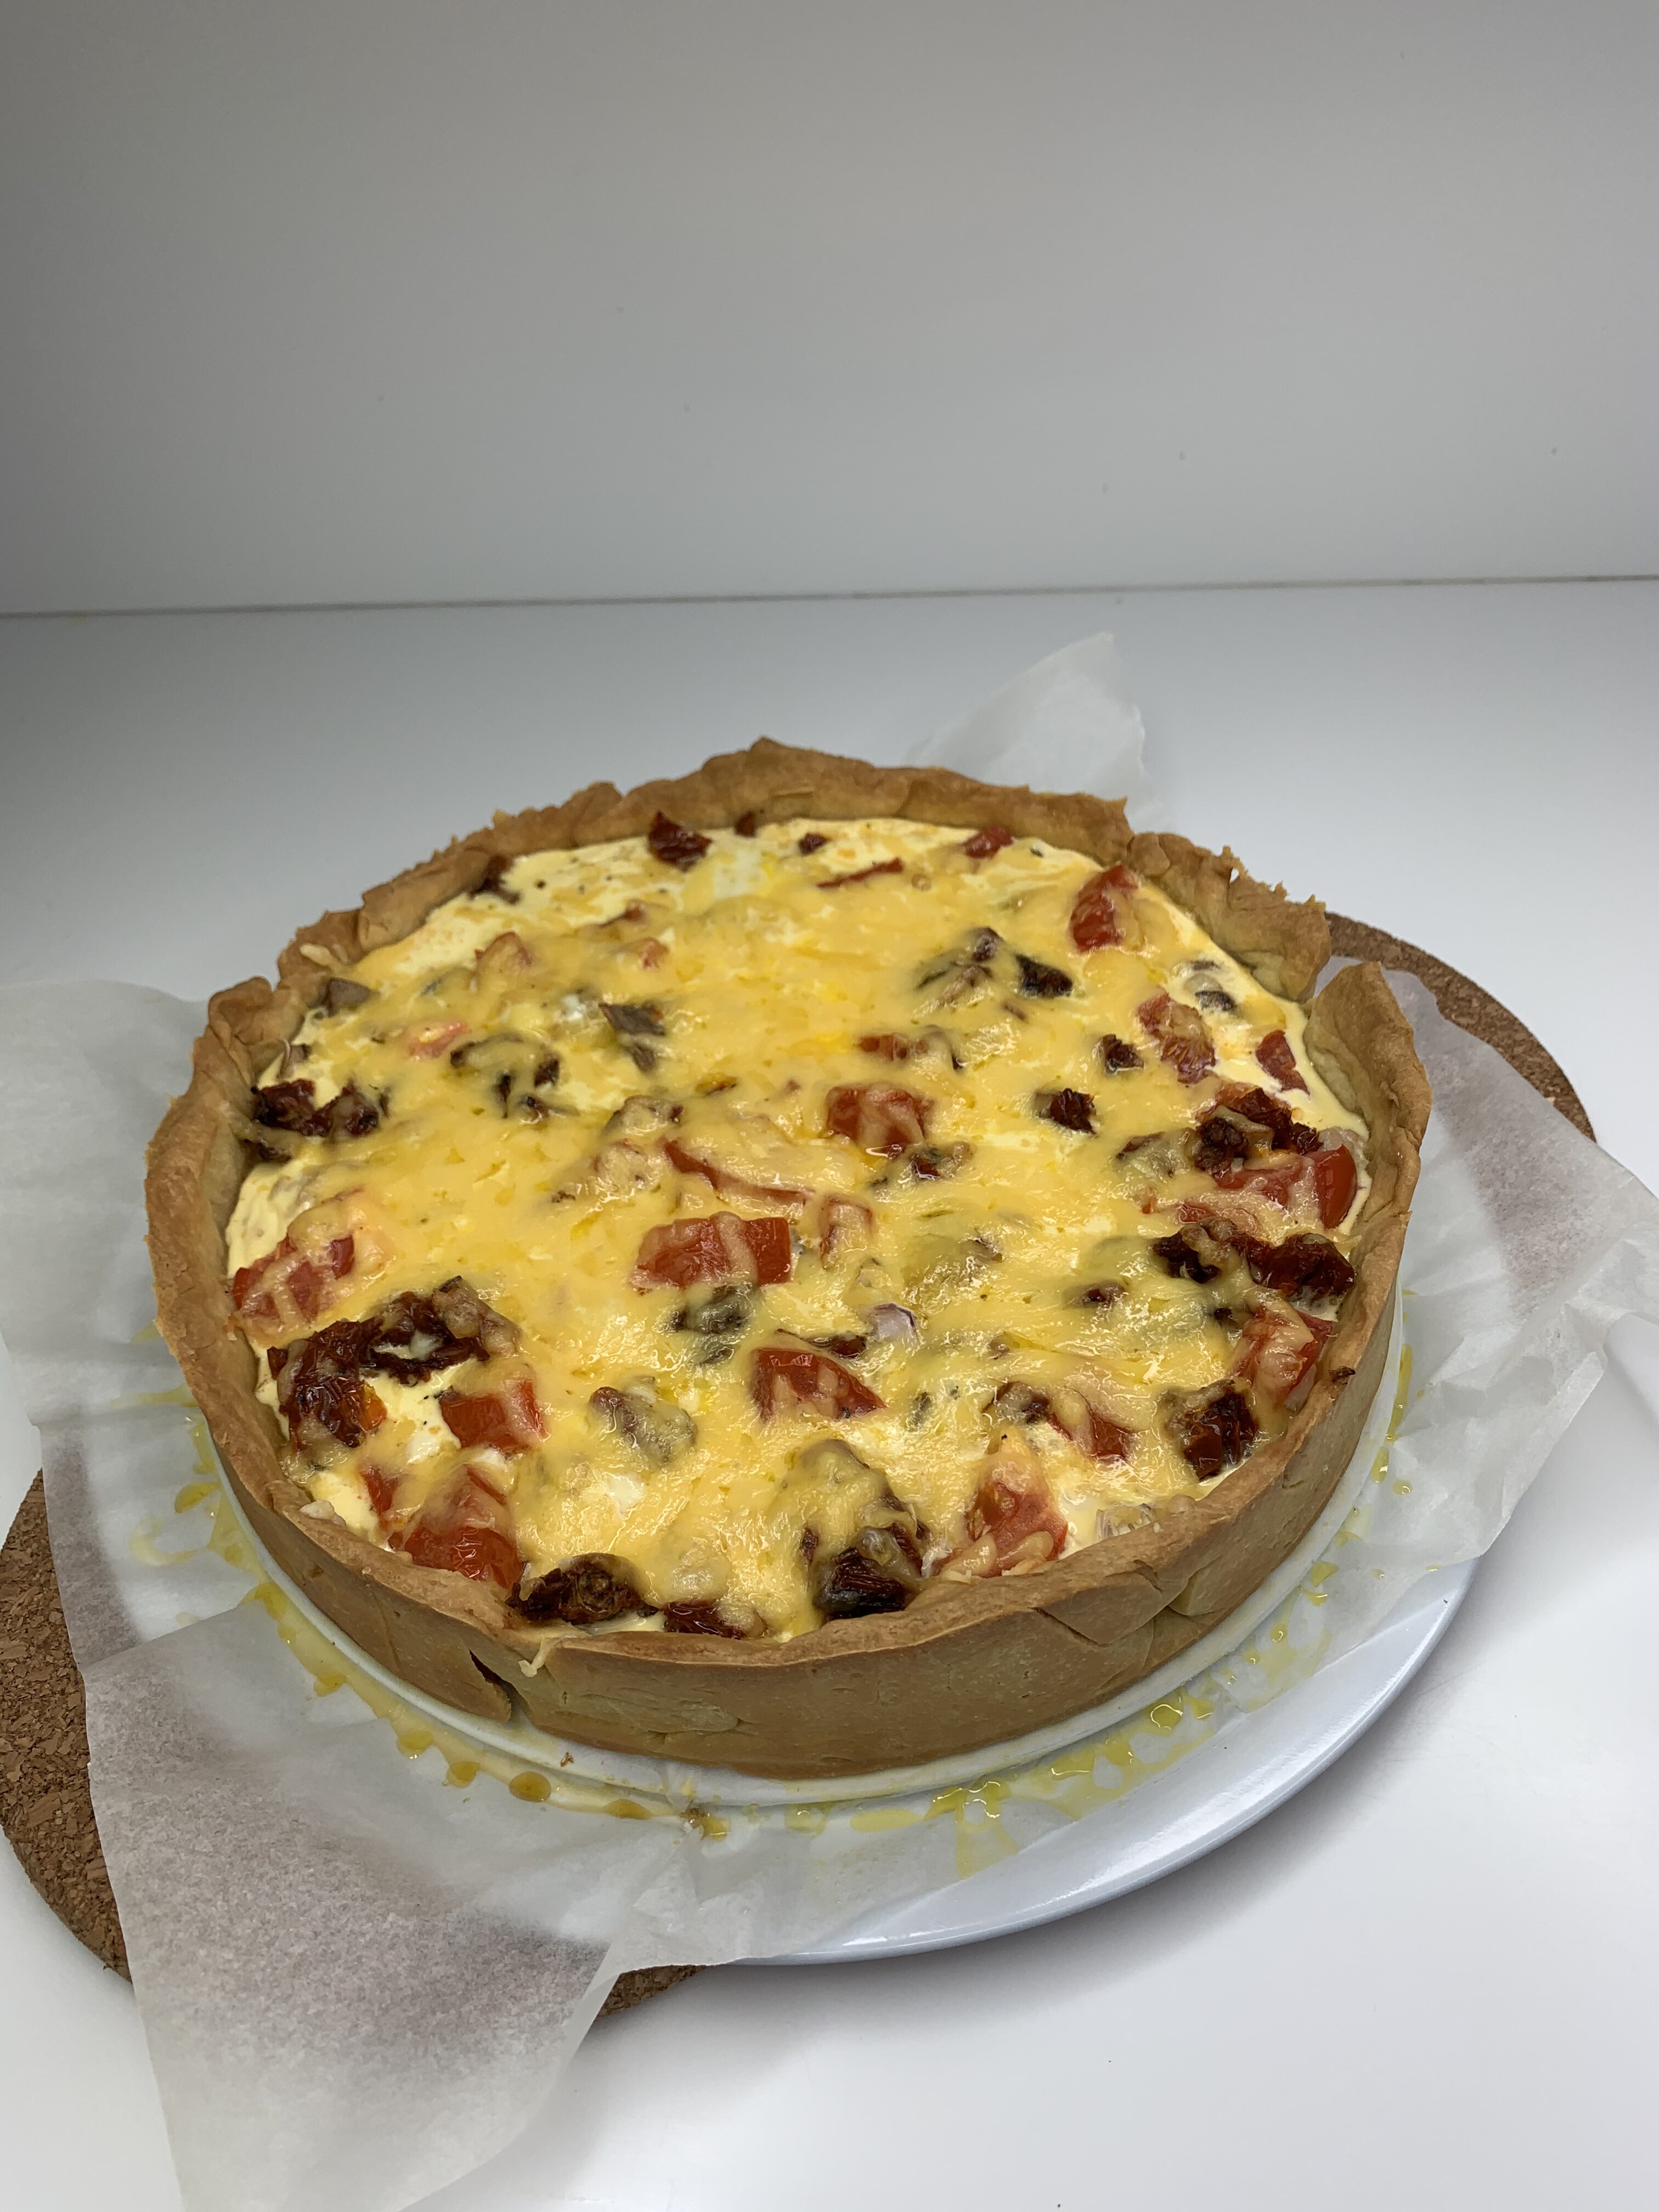 Tuna Quiche: The Dish You Have to Try